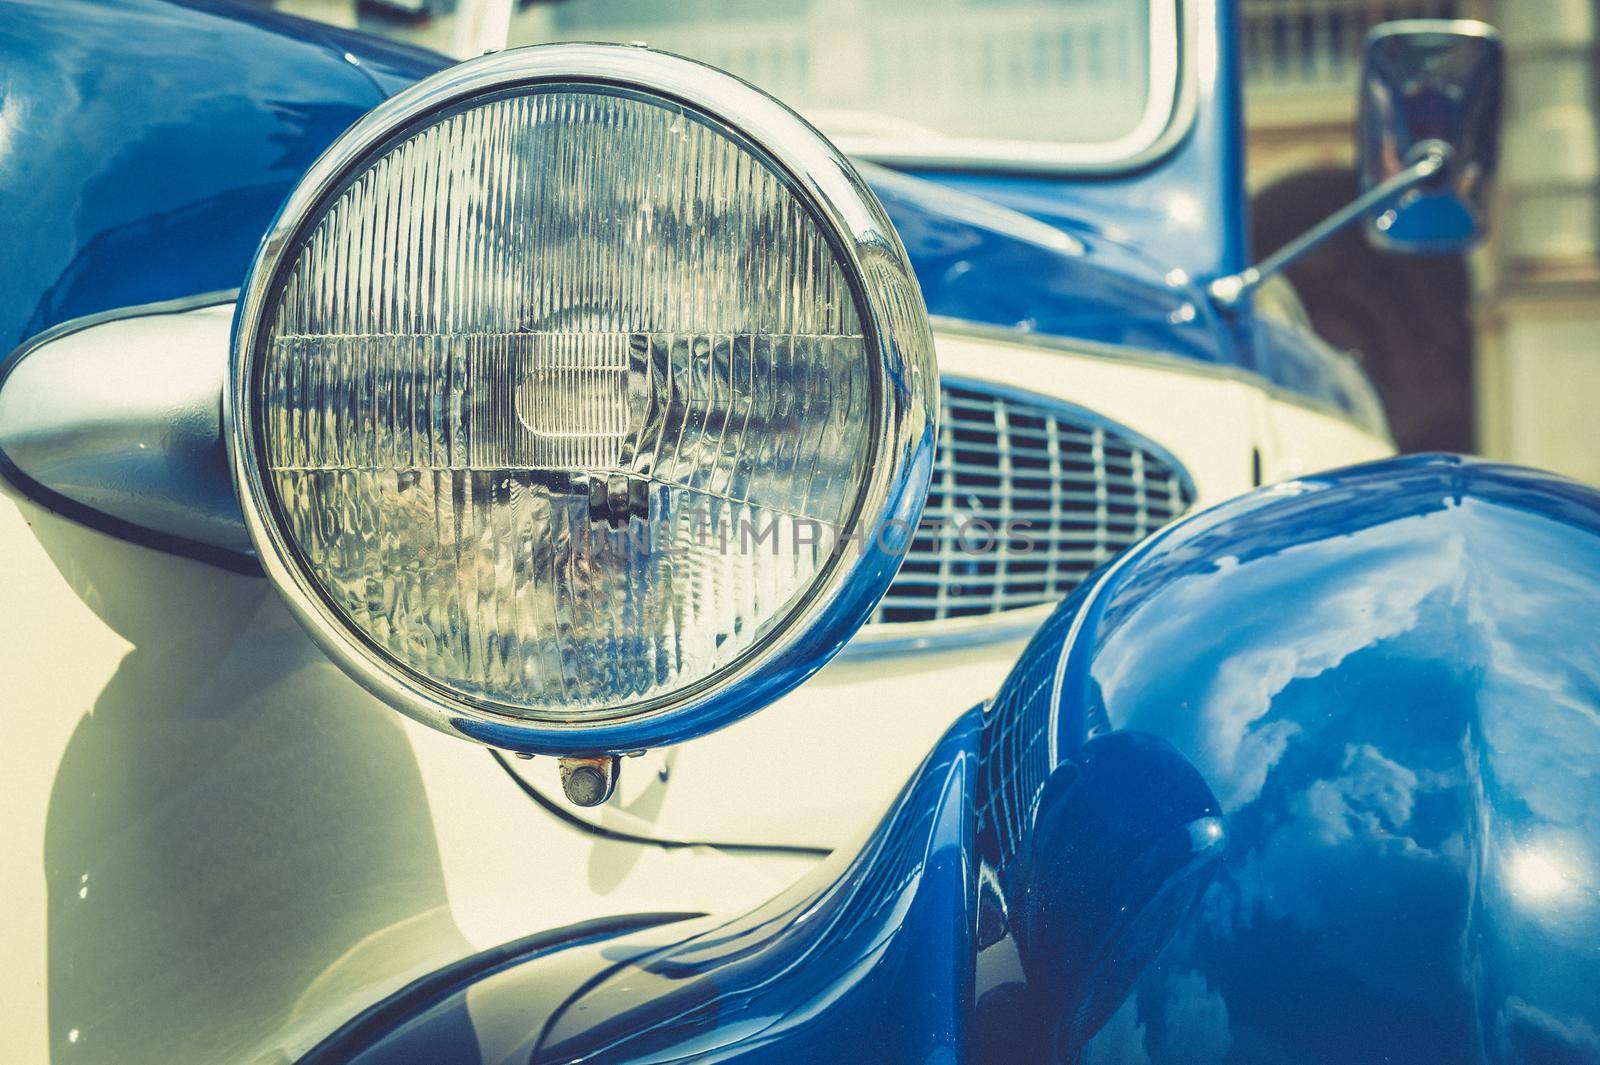 Vintage classic car front view with headlight